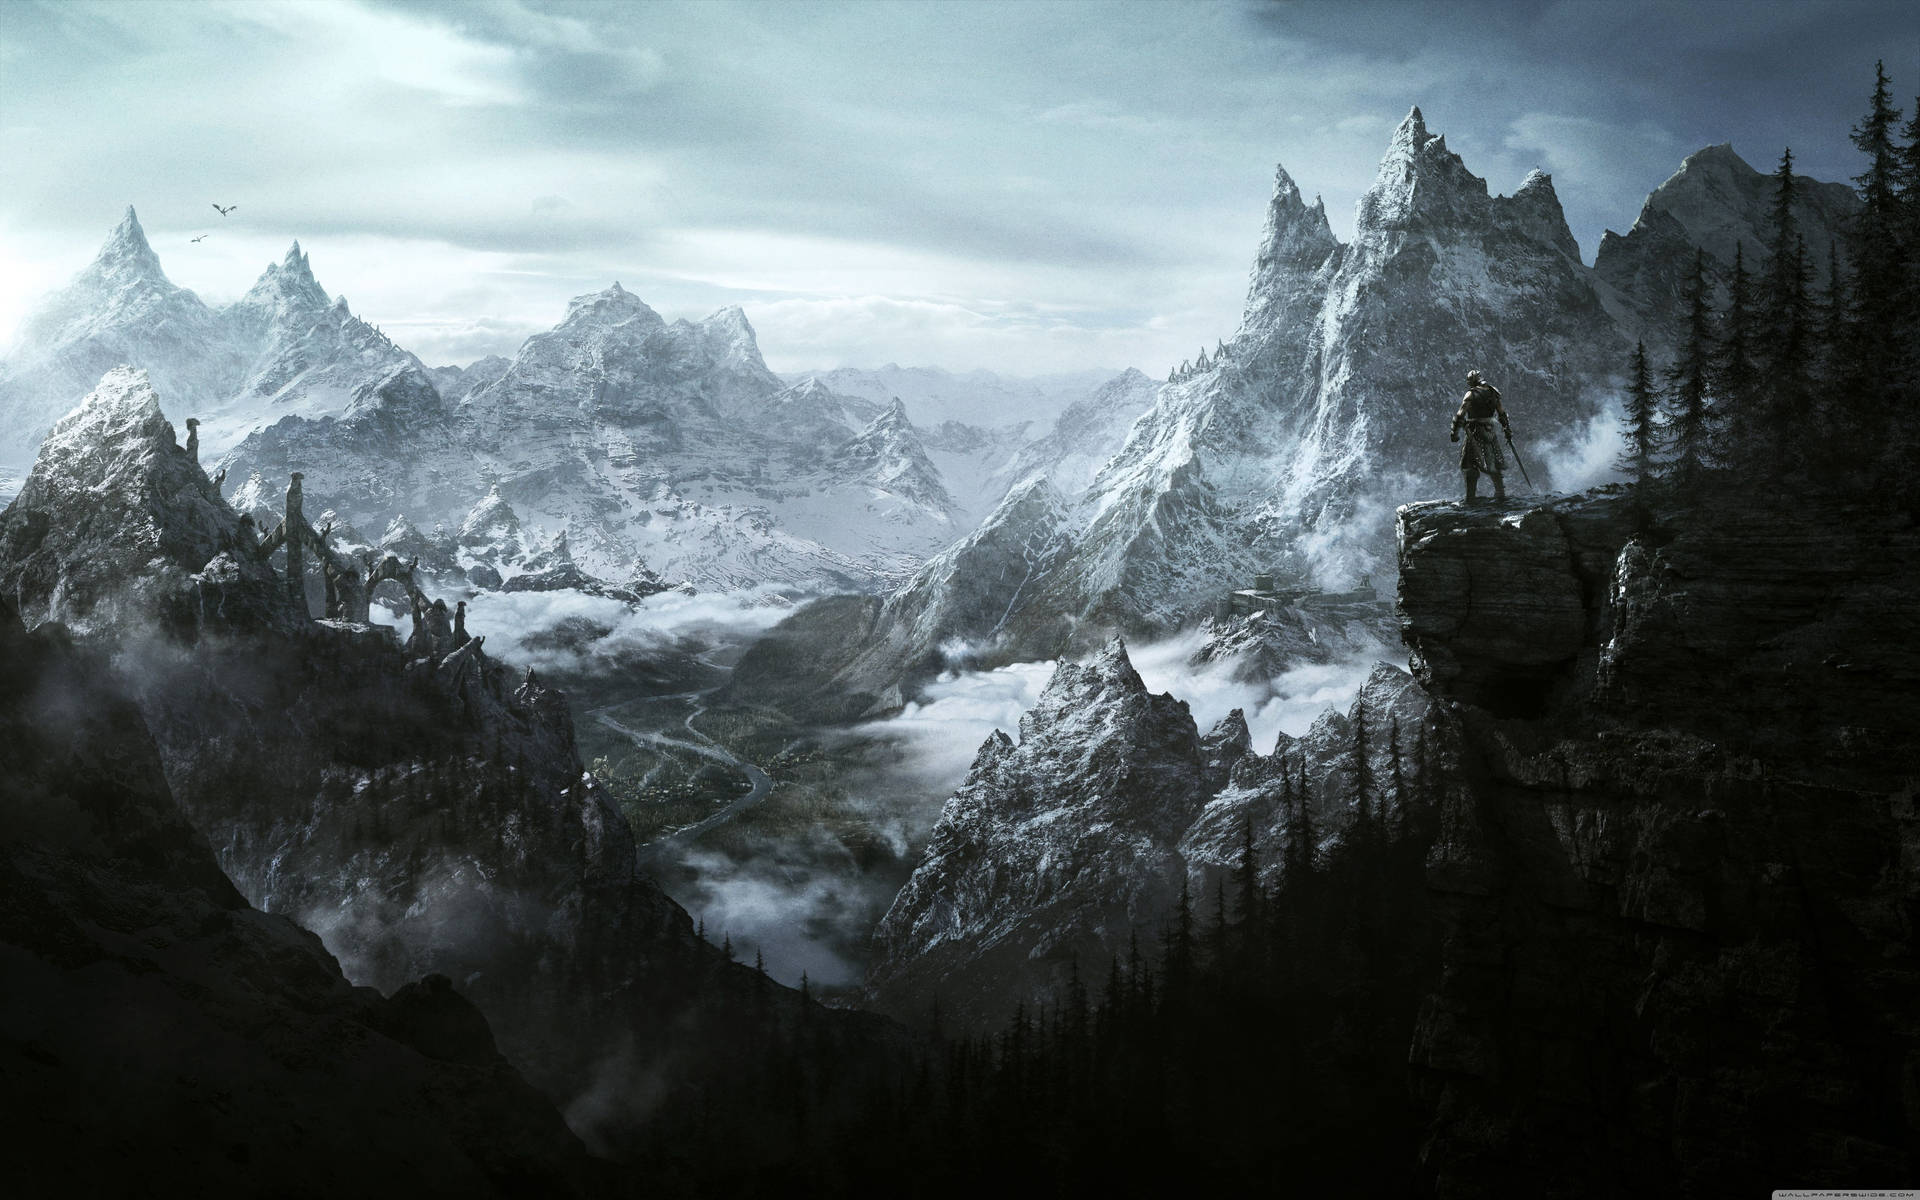 Follow the Elder Scrolls on your adventures in the world of Skyrim Wallpaper